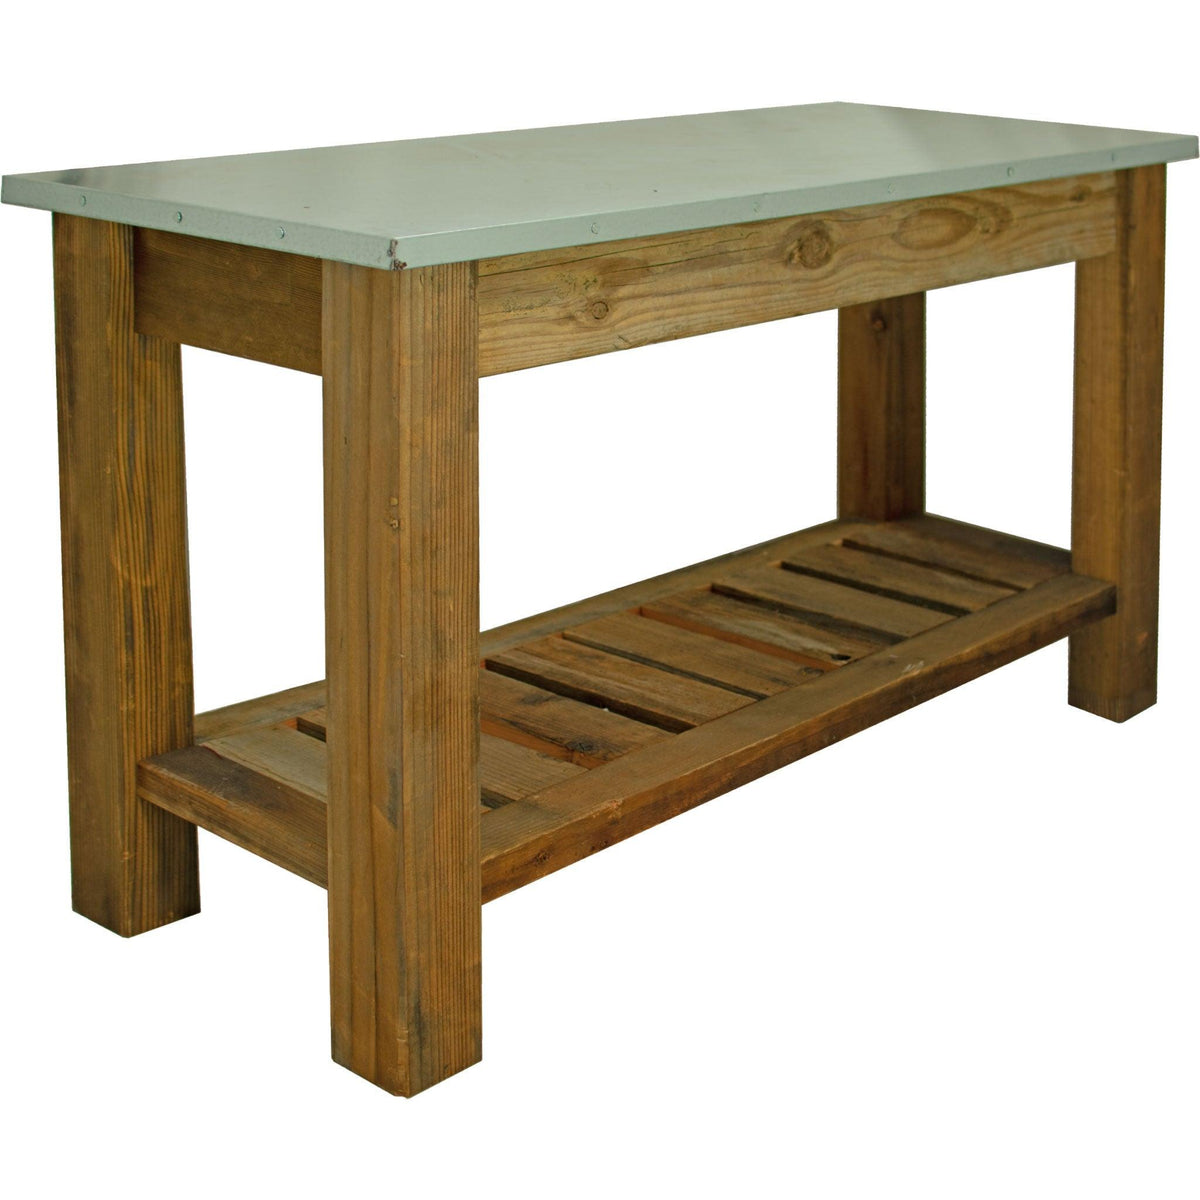 Lee Display's Redwood Outdoor Patio Console Table   Built by Lee Display & Made in the USA.  On sale now at leedisplay.com